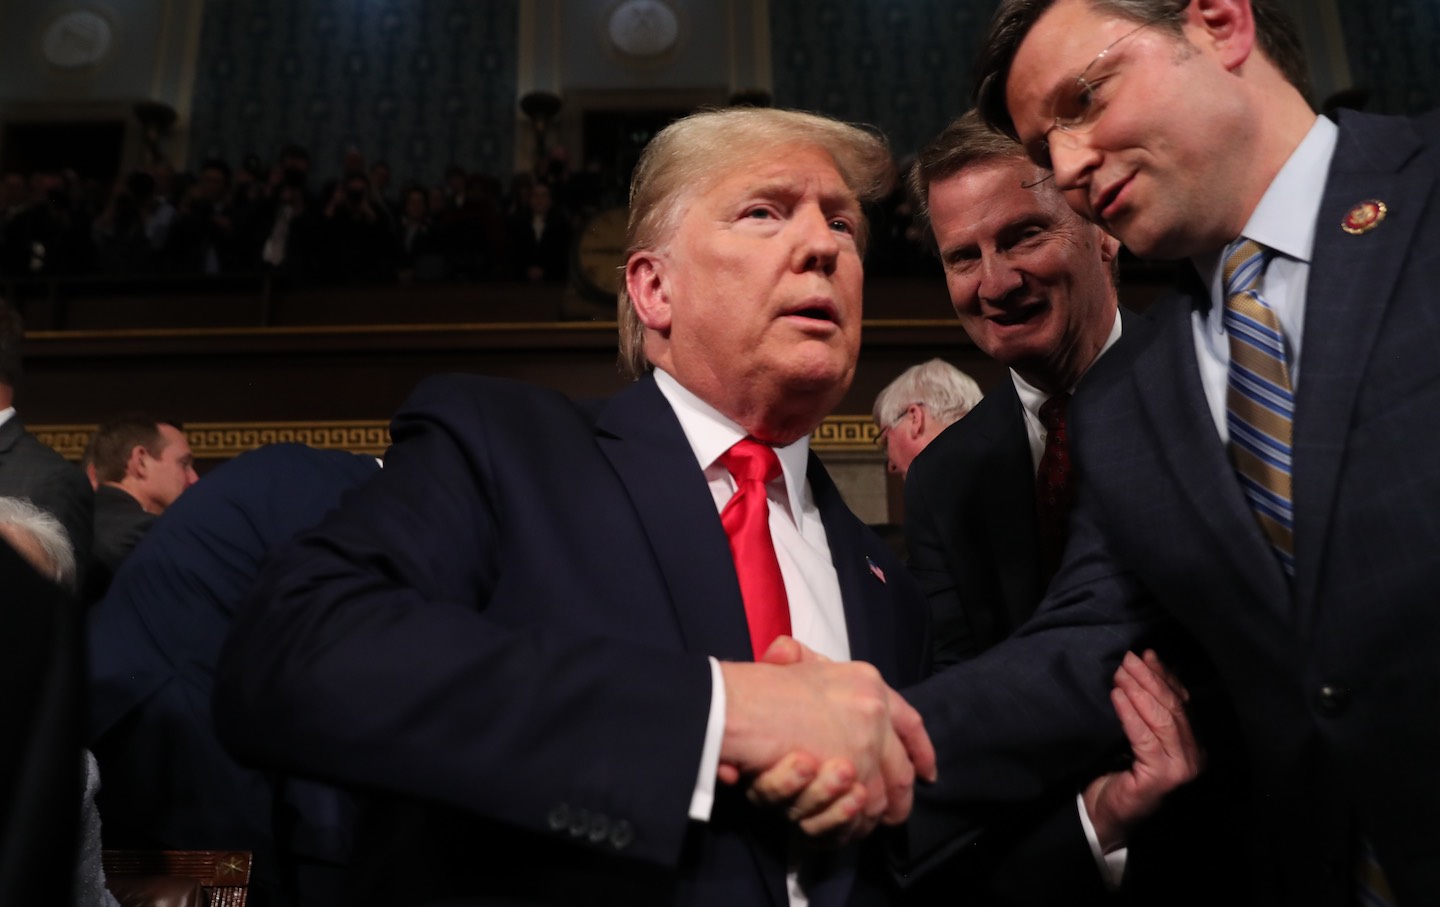 Donald Trump is greeted by Representative Mike Johnson (R-LA) before the 2020 State of the Union address in the House chamber on February 4, 2020, in Washington, DC.